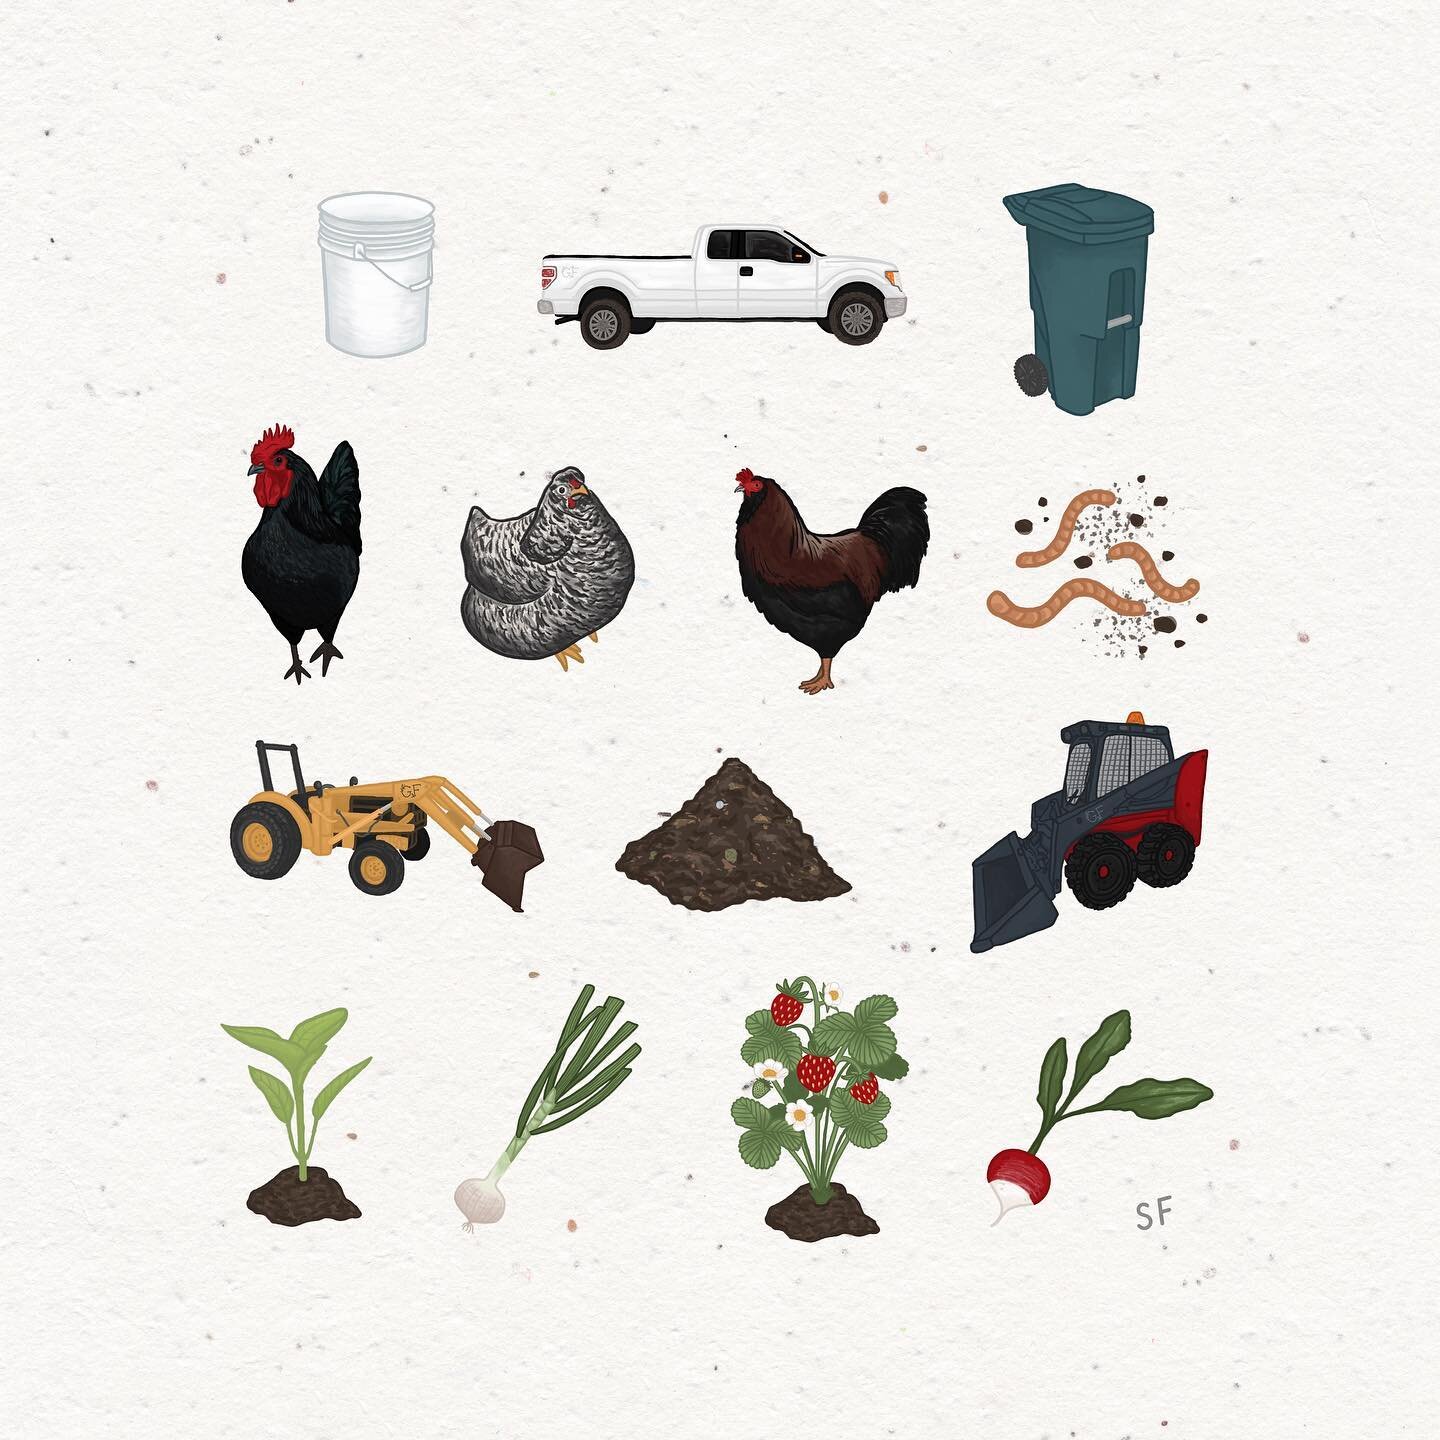 Who knew drawing dirt would be so fun?! Here is a closer look (swipe) at the illustrations for the @greenerfarmsyqg rebrand! The strawberries might be my favourite.

This weekend I am working on my tiny veggie garden and seeing which of the tiny plan